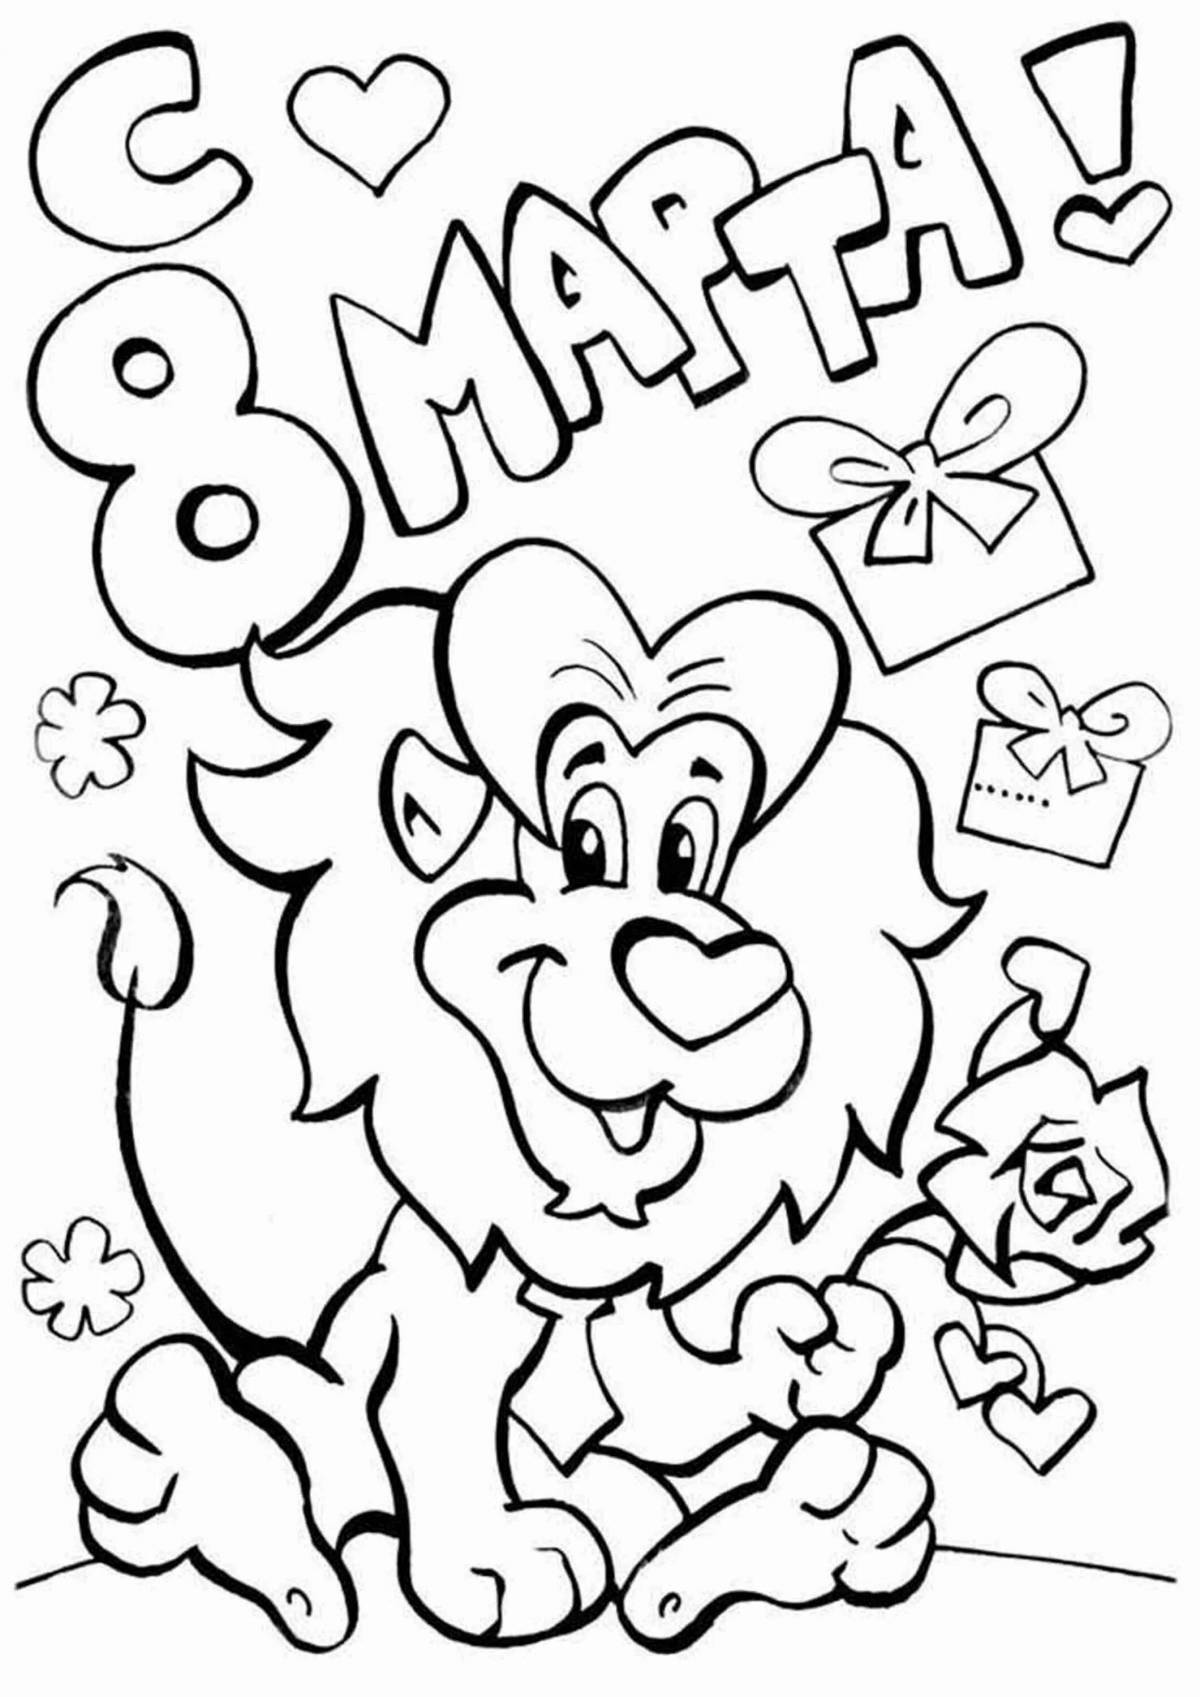 Mother's March 8 coloring page